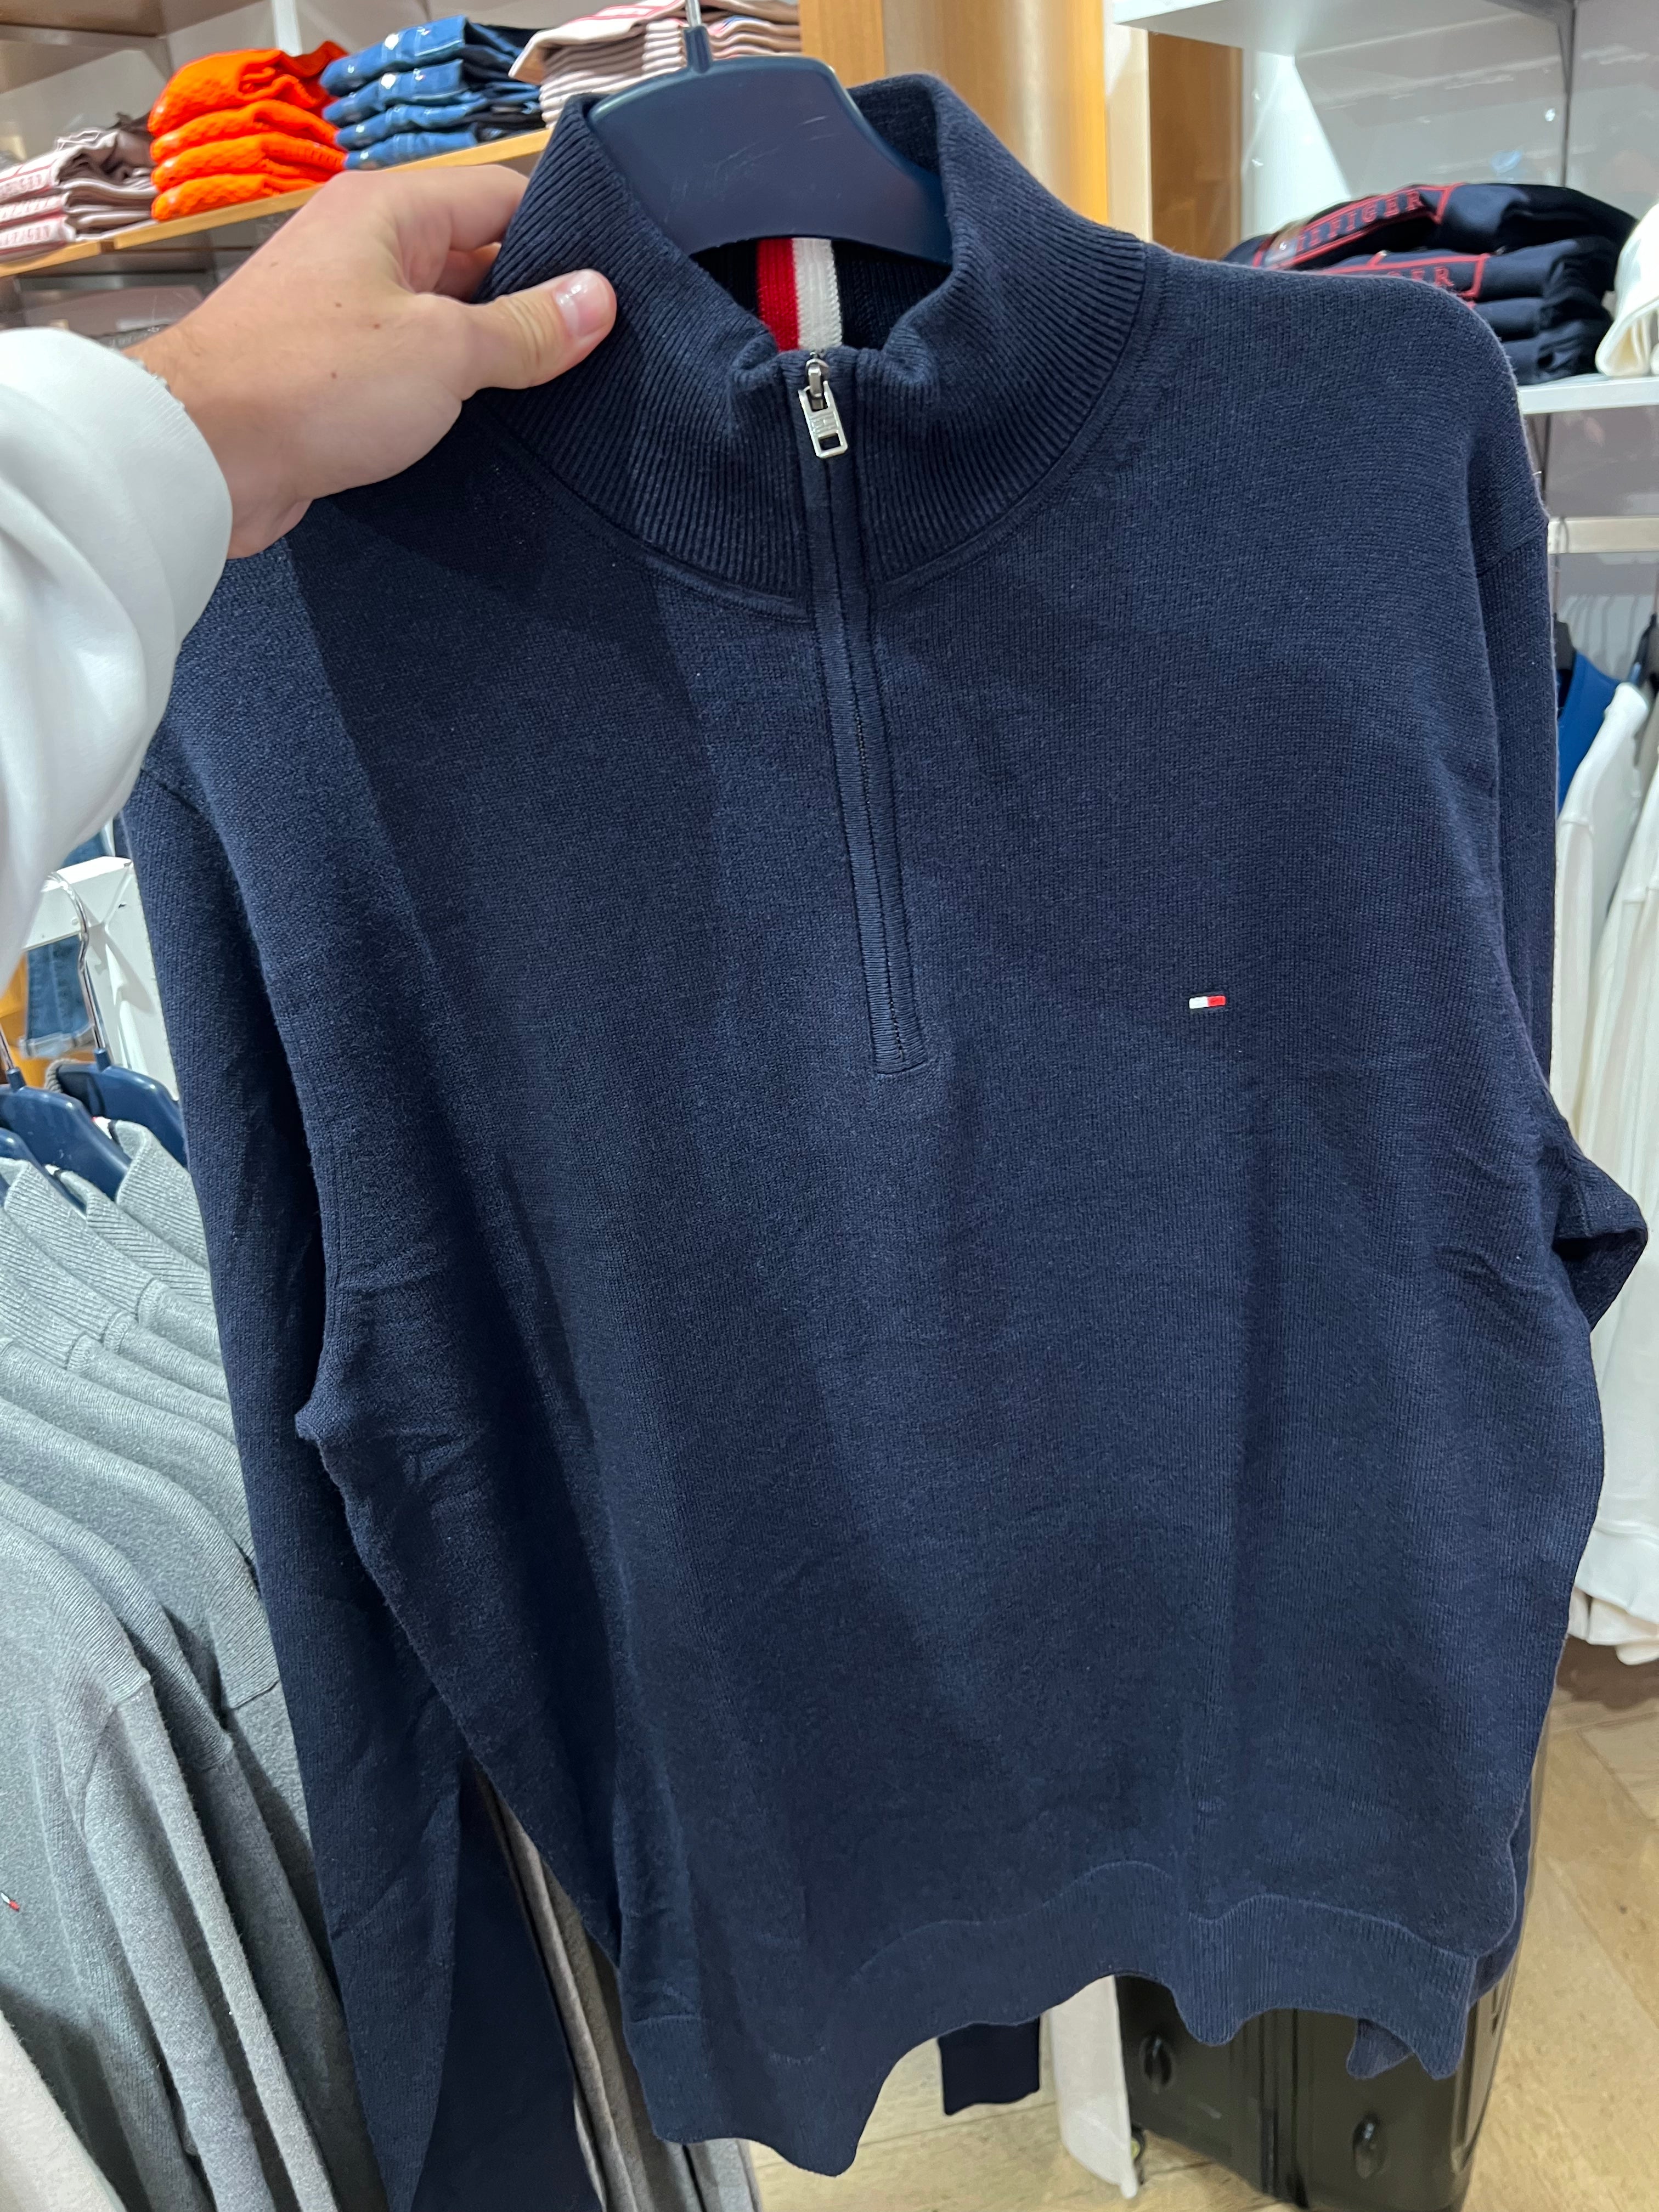 Tommy Hilfiger Pull overs